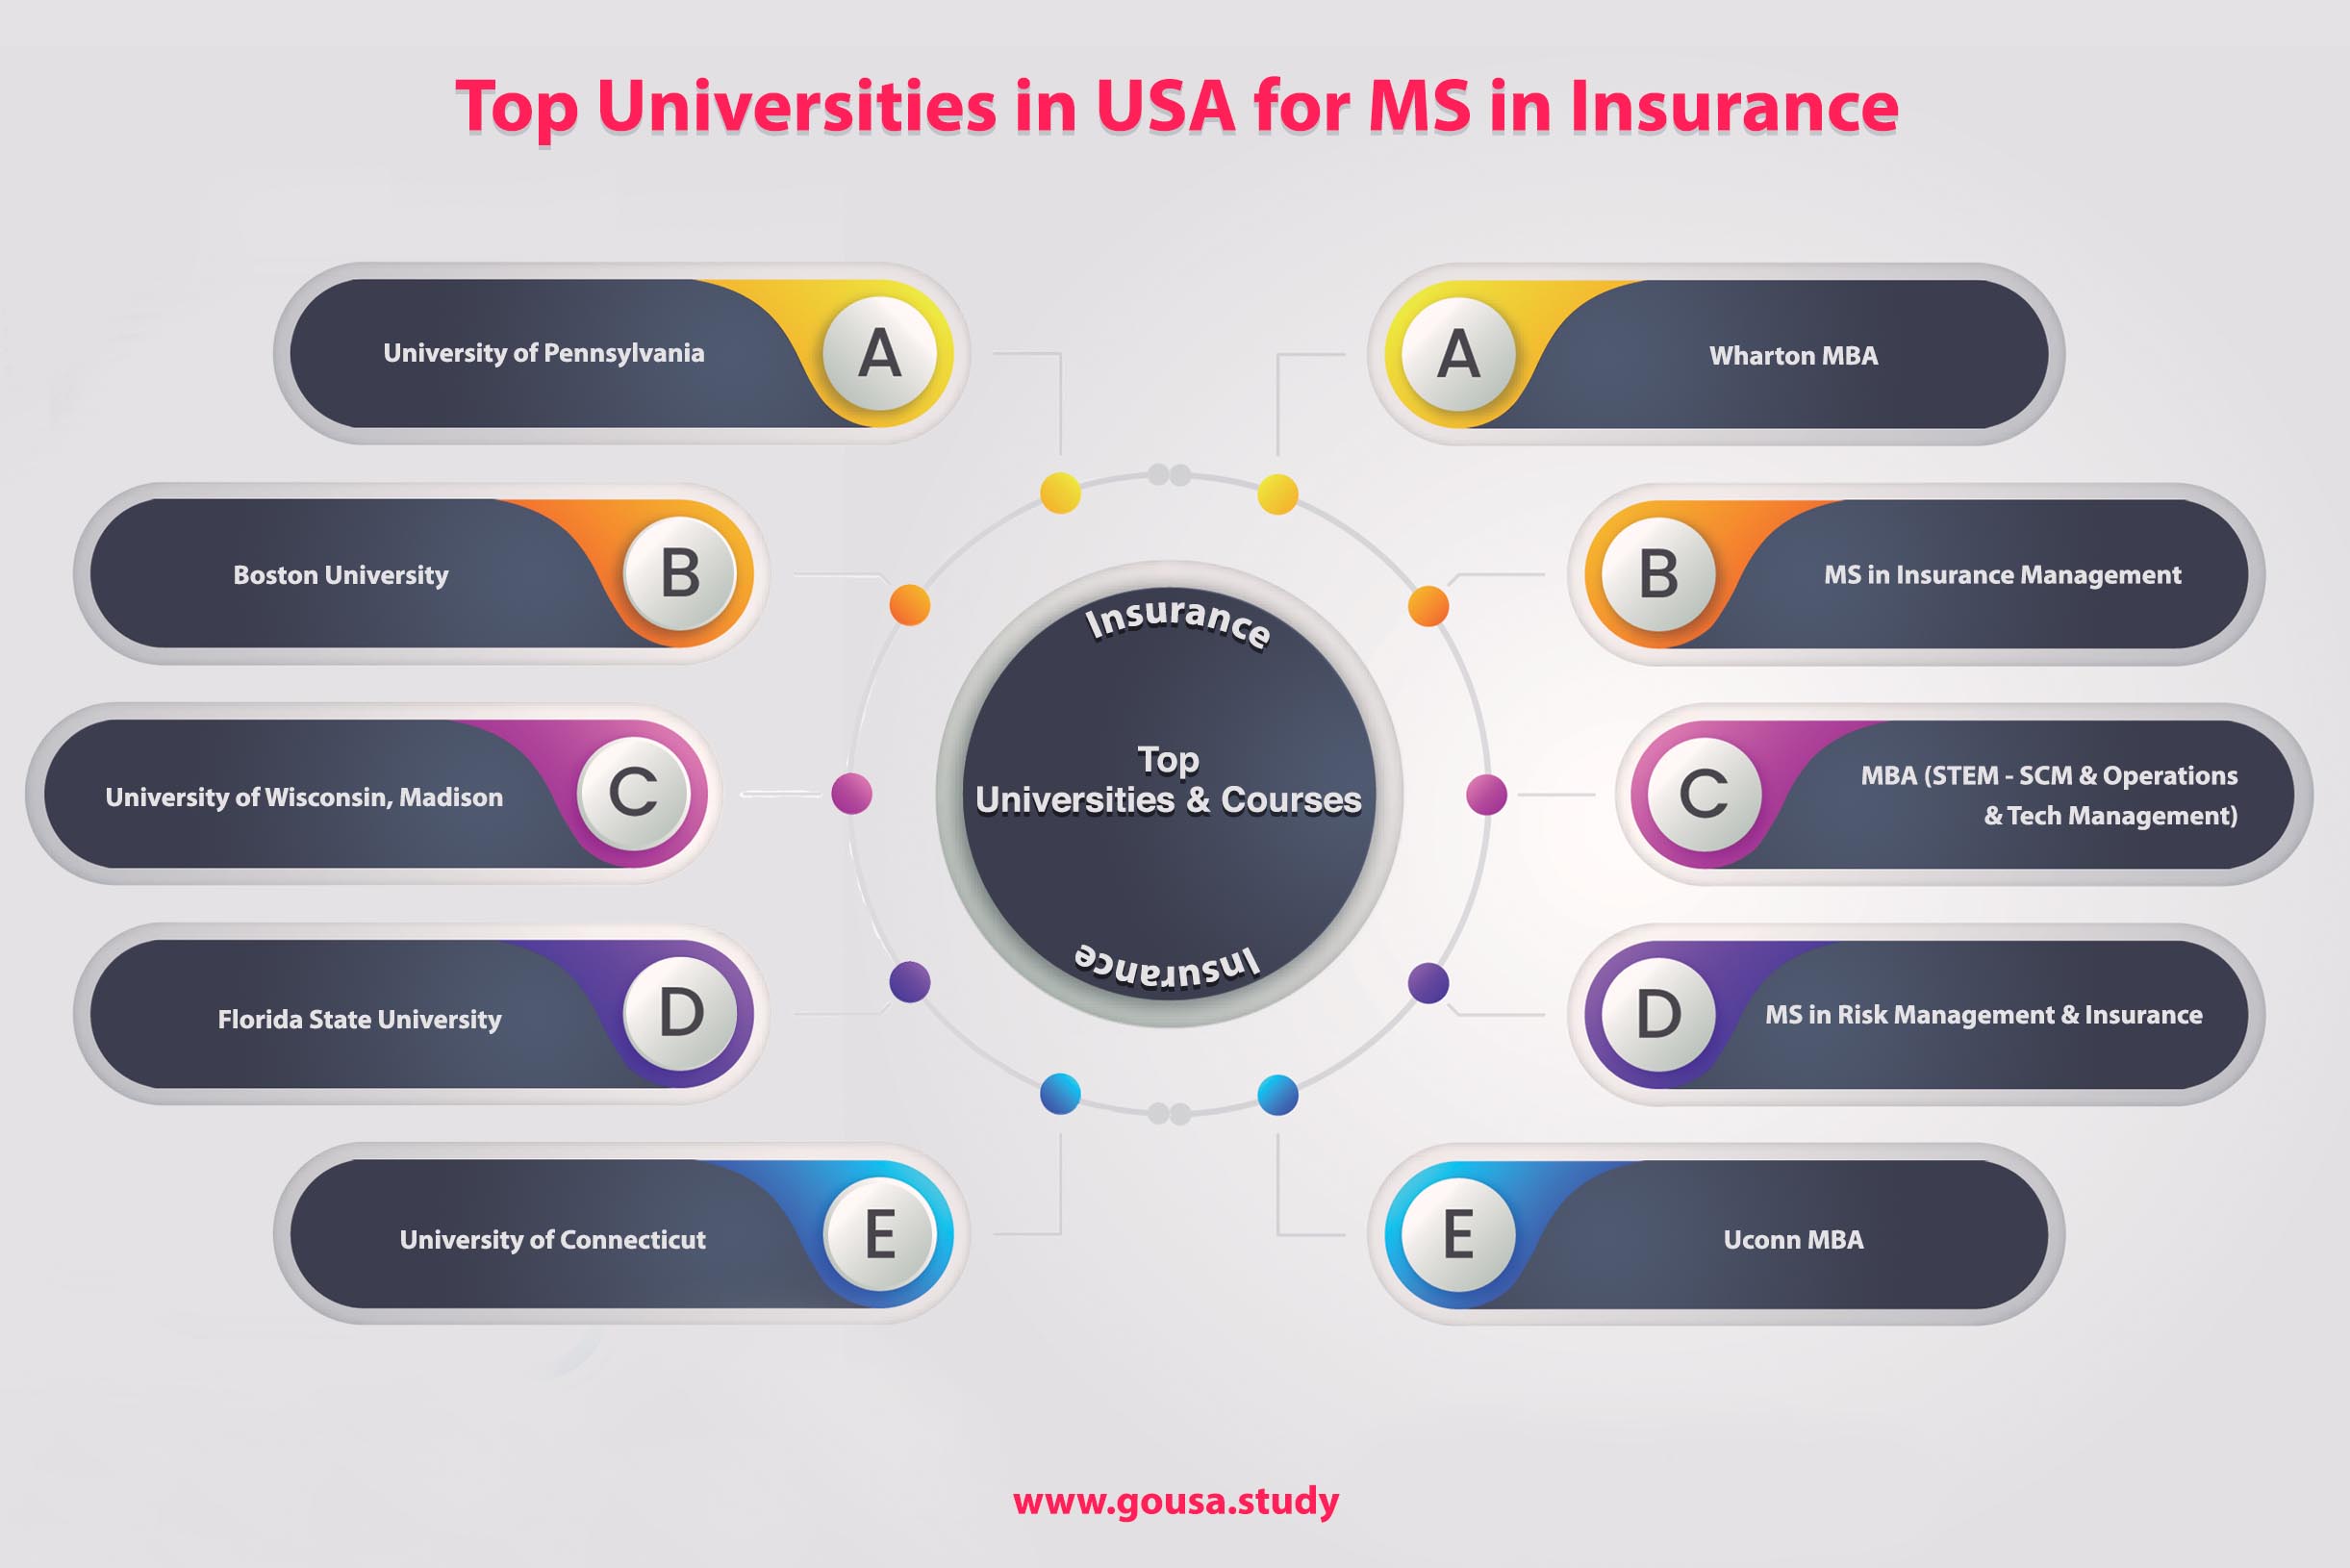 Top Universities in USA for MS in Insurance